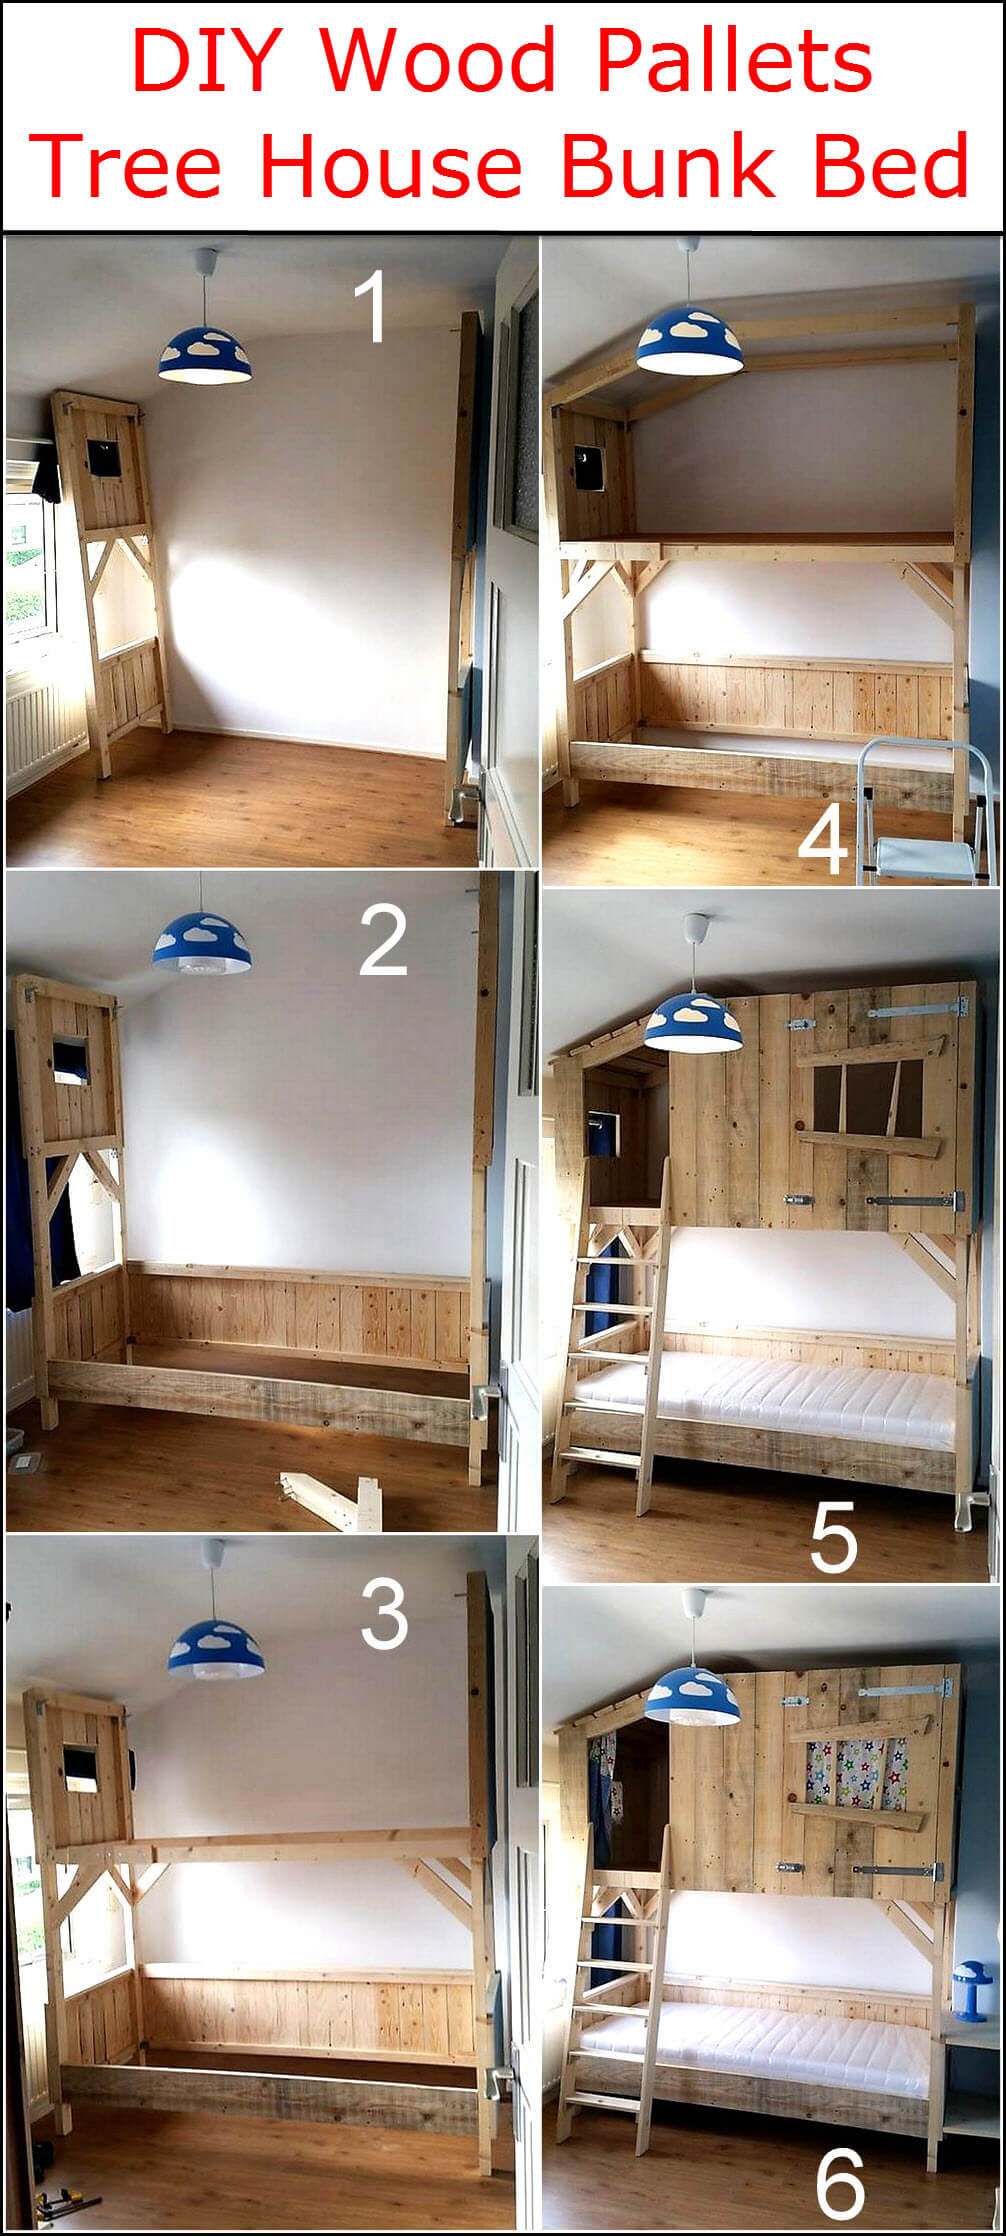 Diy Wood Pallets Tree House Bunk Bed, Bunk Beds Made From Pallets